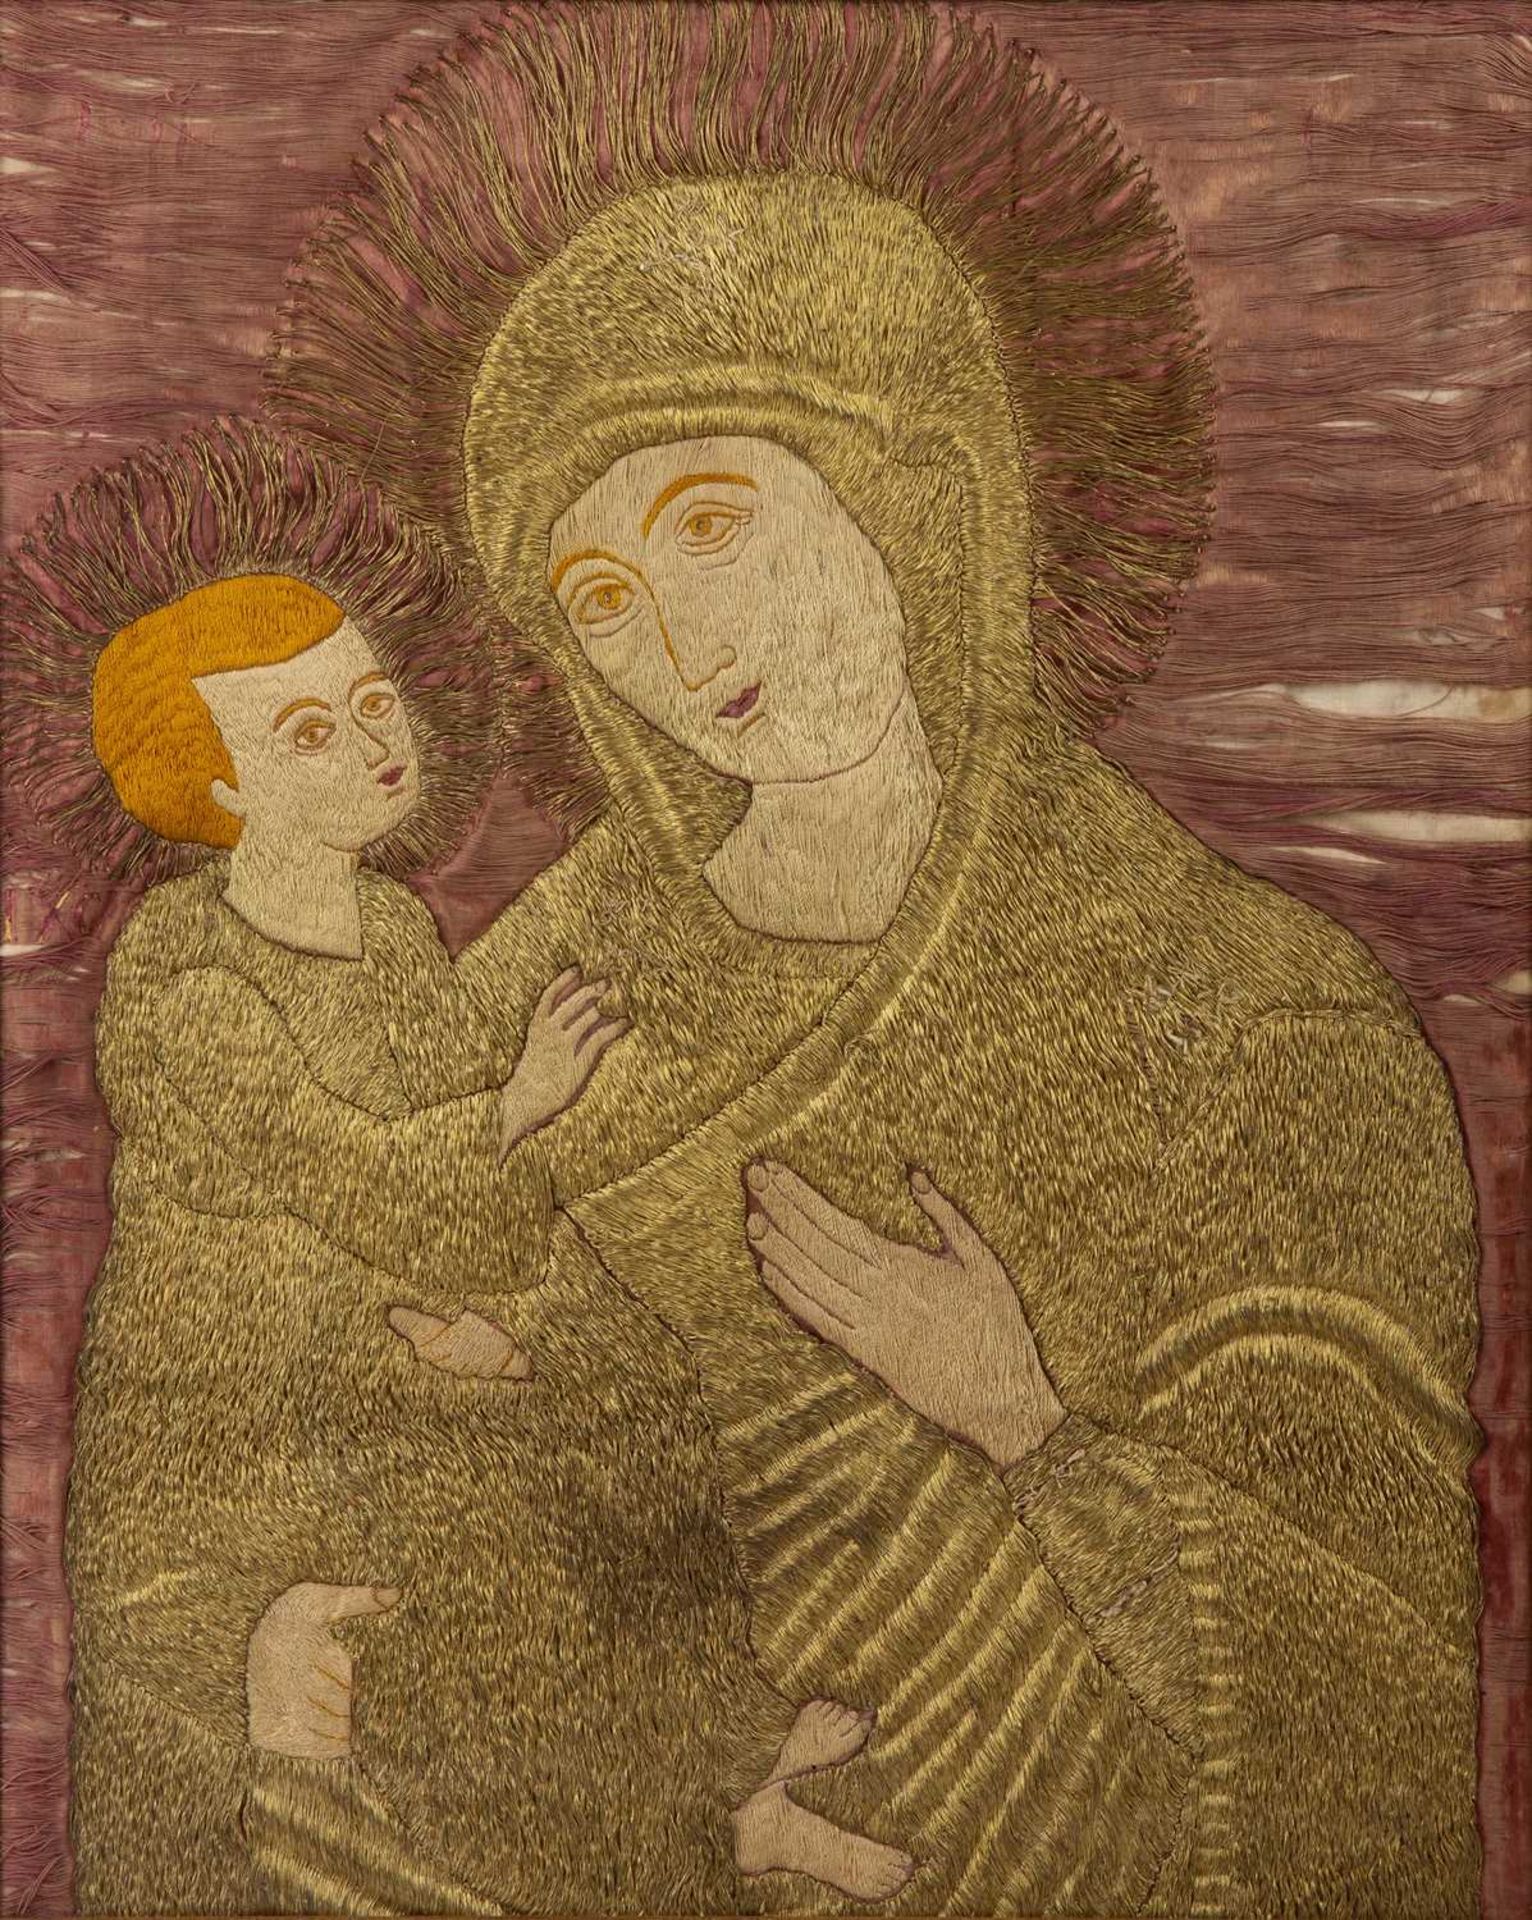 A 19th century or earlier European Madonna and child with bullion work on a manganese silk